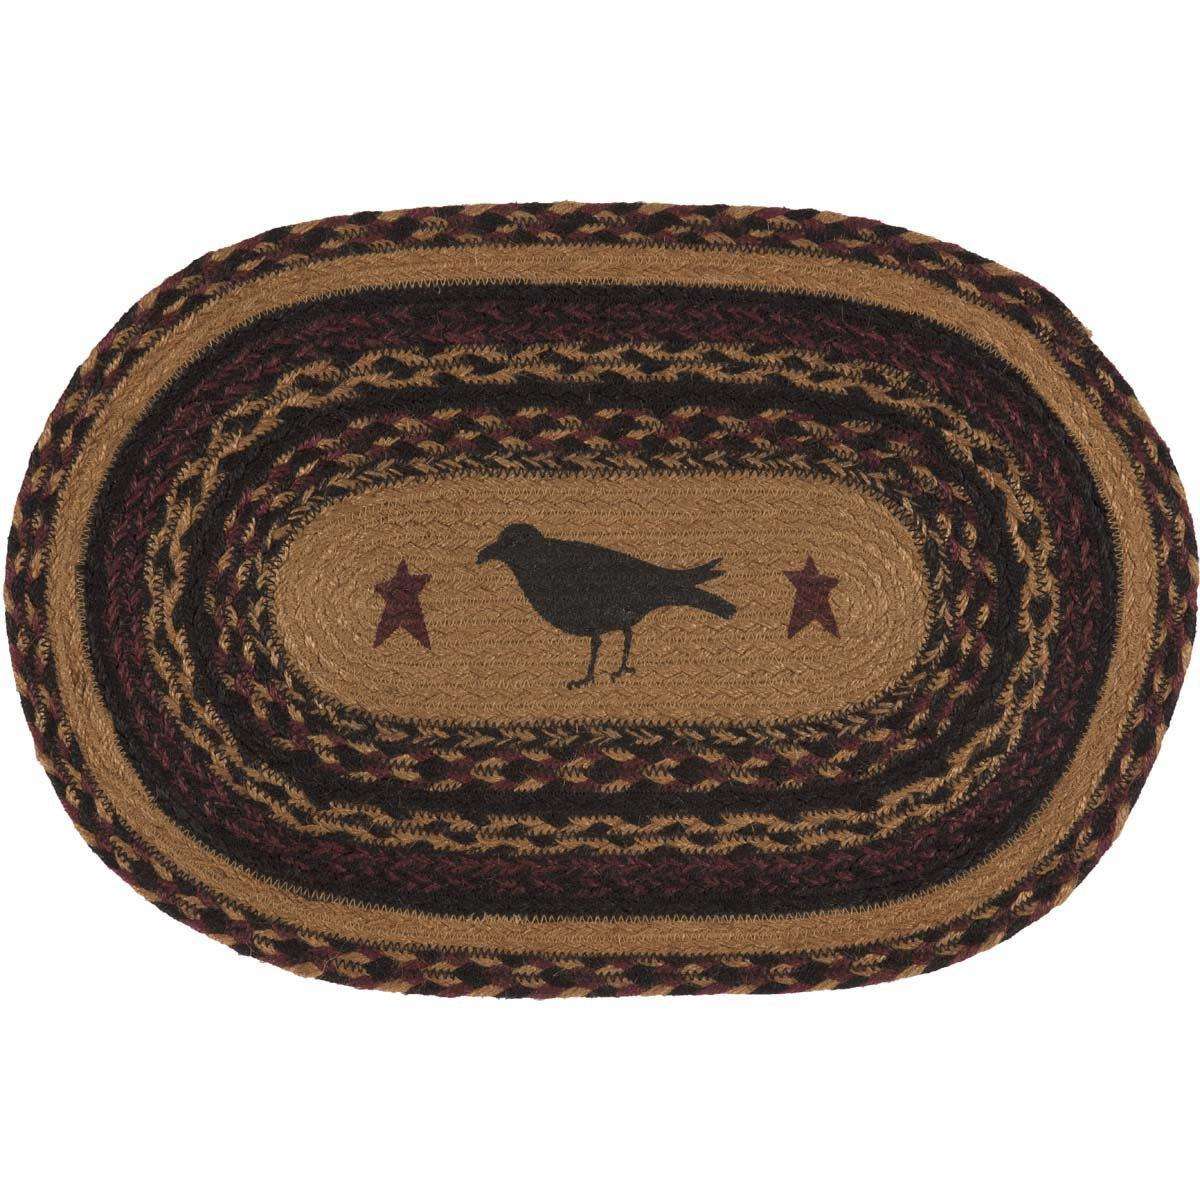 Heritage Farms Crow Jute Braided Placemat Set of 6 VHC Brands - The Fox Decor